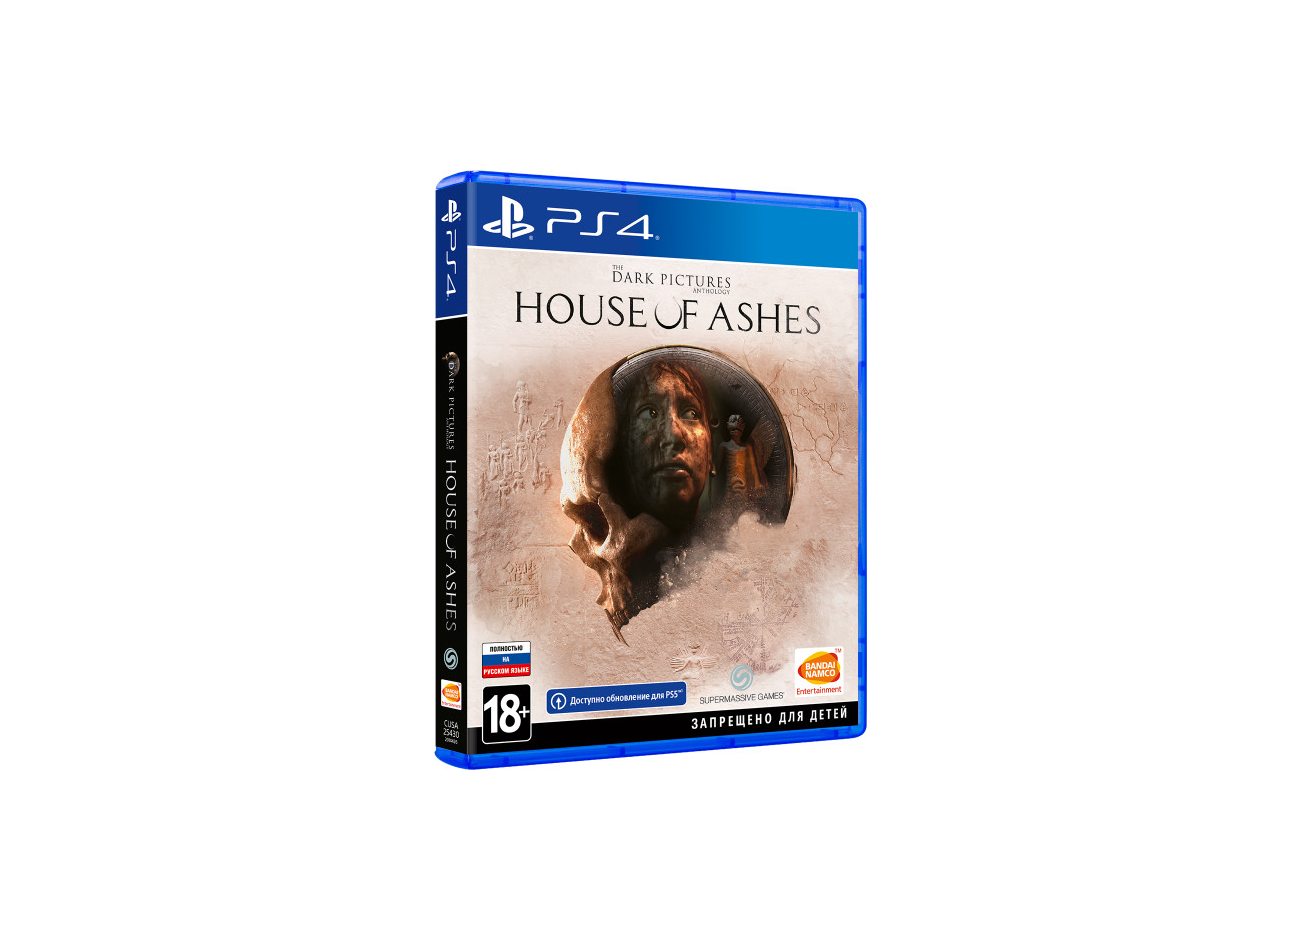 PS 4 The Dark Pictures: House of Ashes PS 4